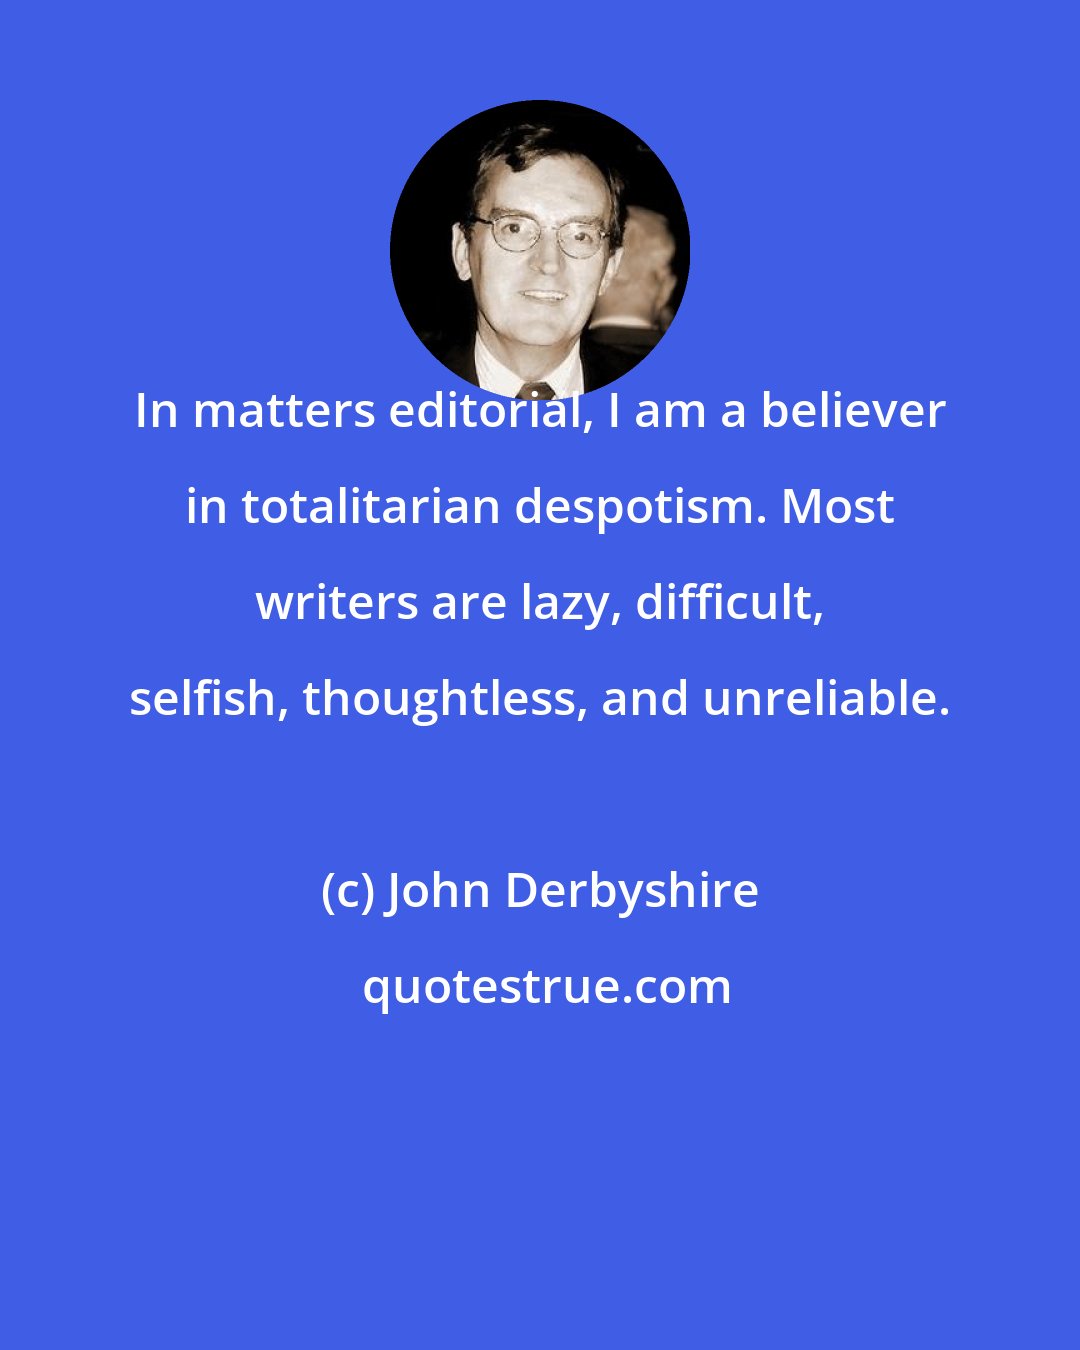 John Derbyshire: In matters editorial, I am a believer in totalitarian despotism. Most writers are lazy, difficult, selfish, thoughtless, and unreliable.